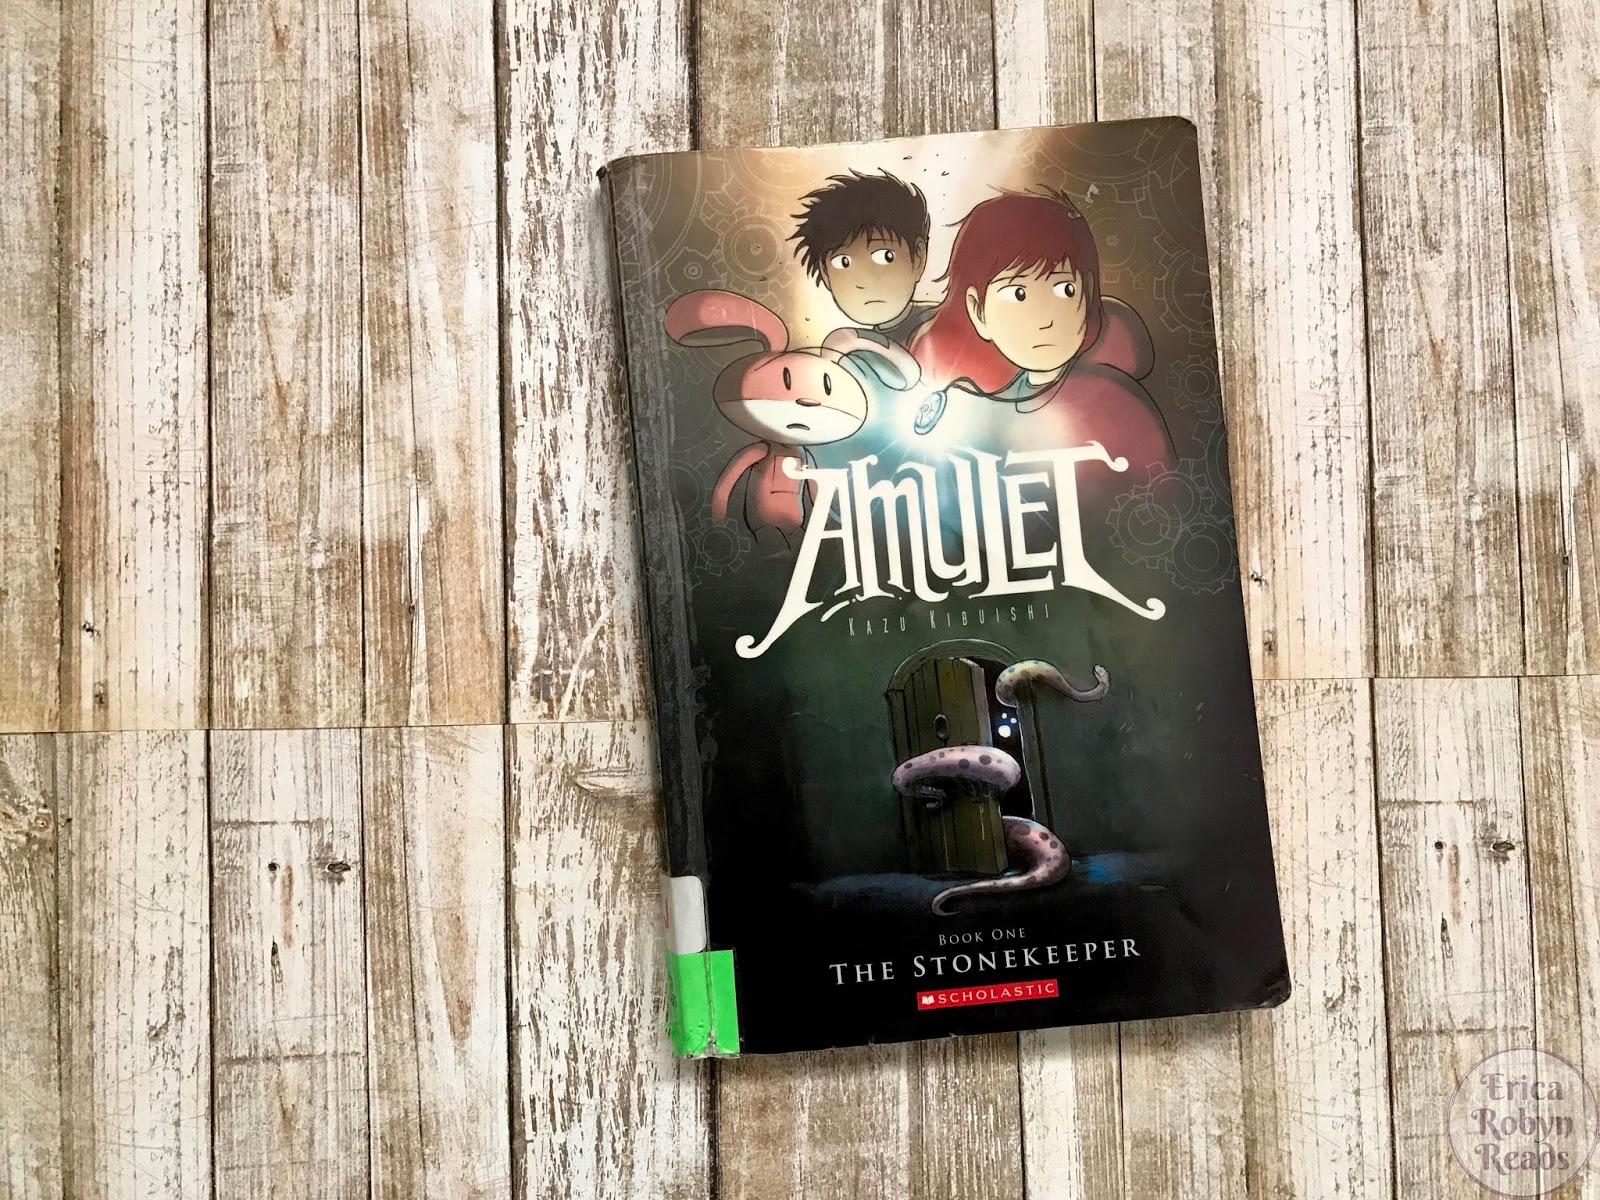 Erica Robyn Reads: [Graphic Novel Review] The Storekeeper (Amulet #1